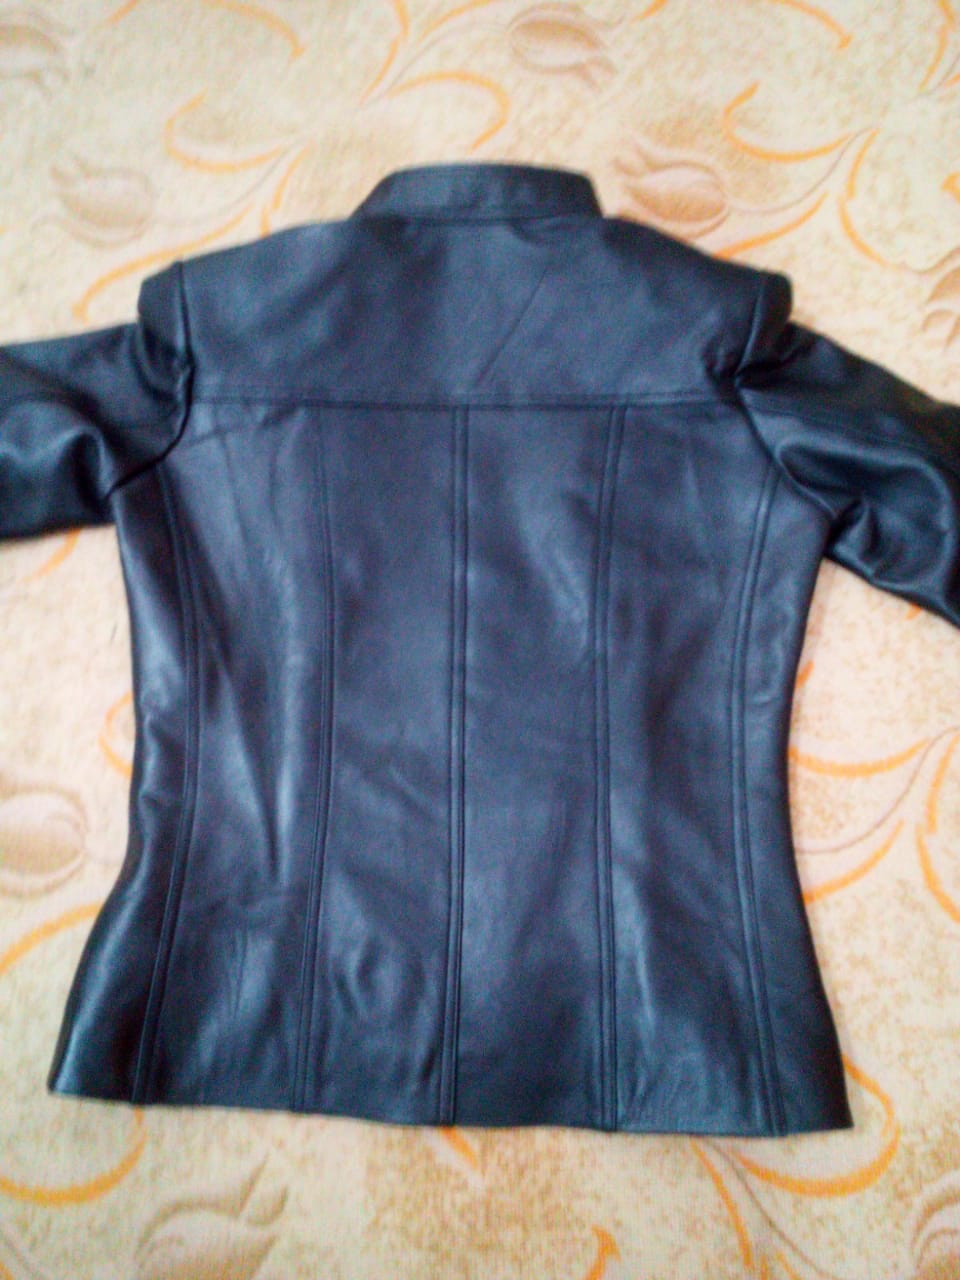 Leather Jacket for Women,